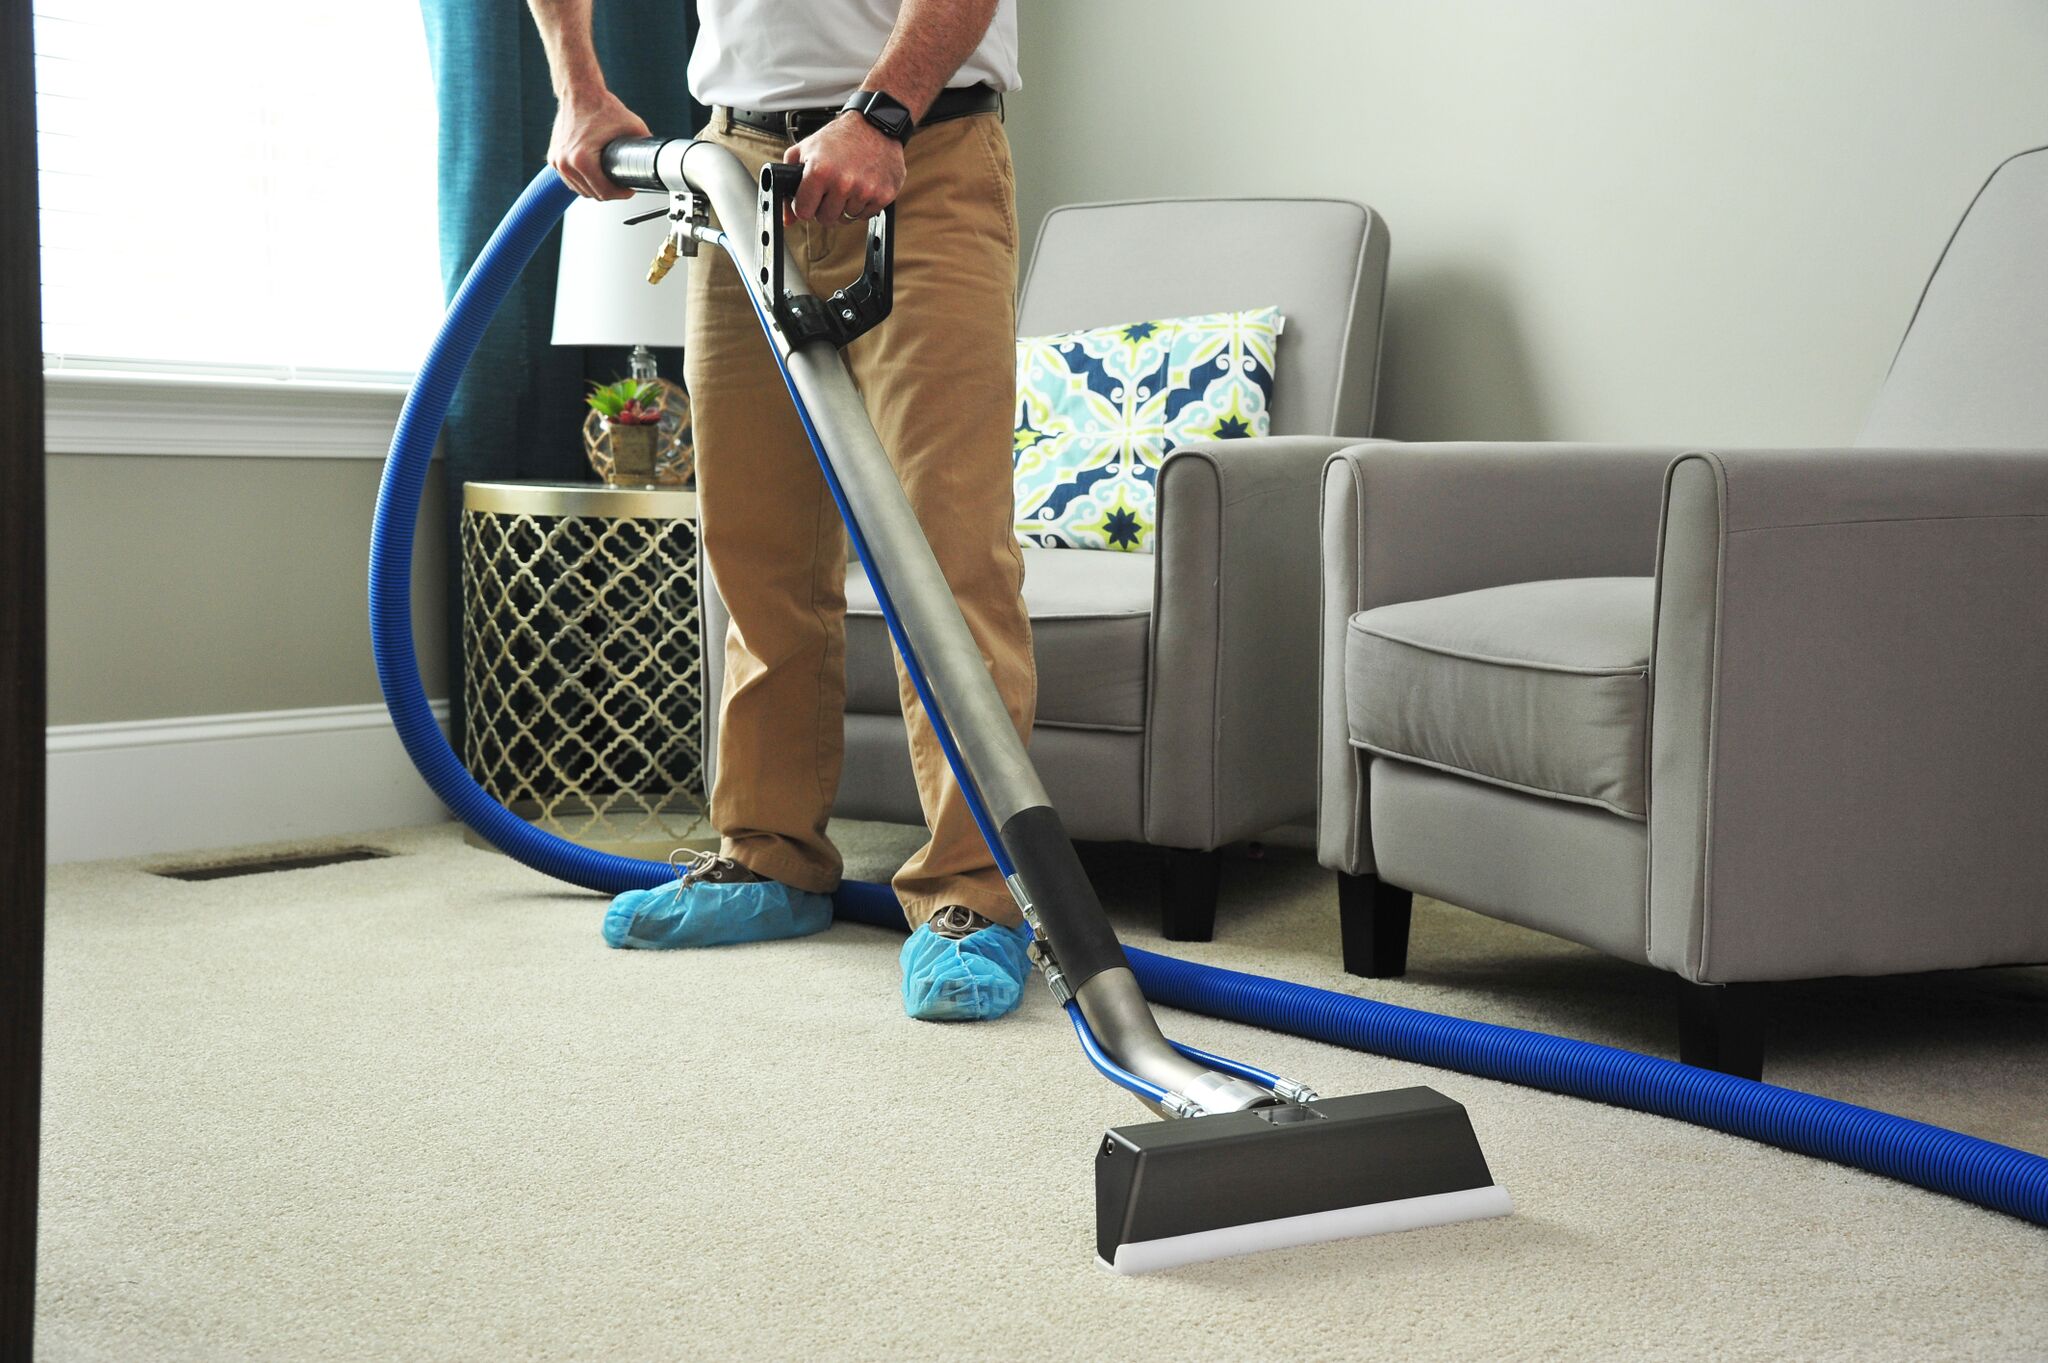 Steam Cleaning 101: Can You Steam Clean Carpets Safely?插图3